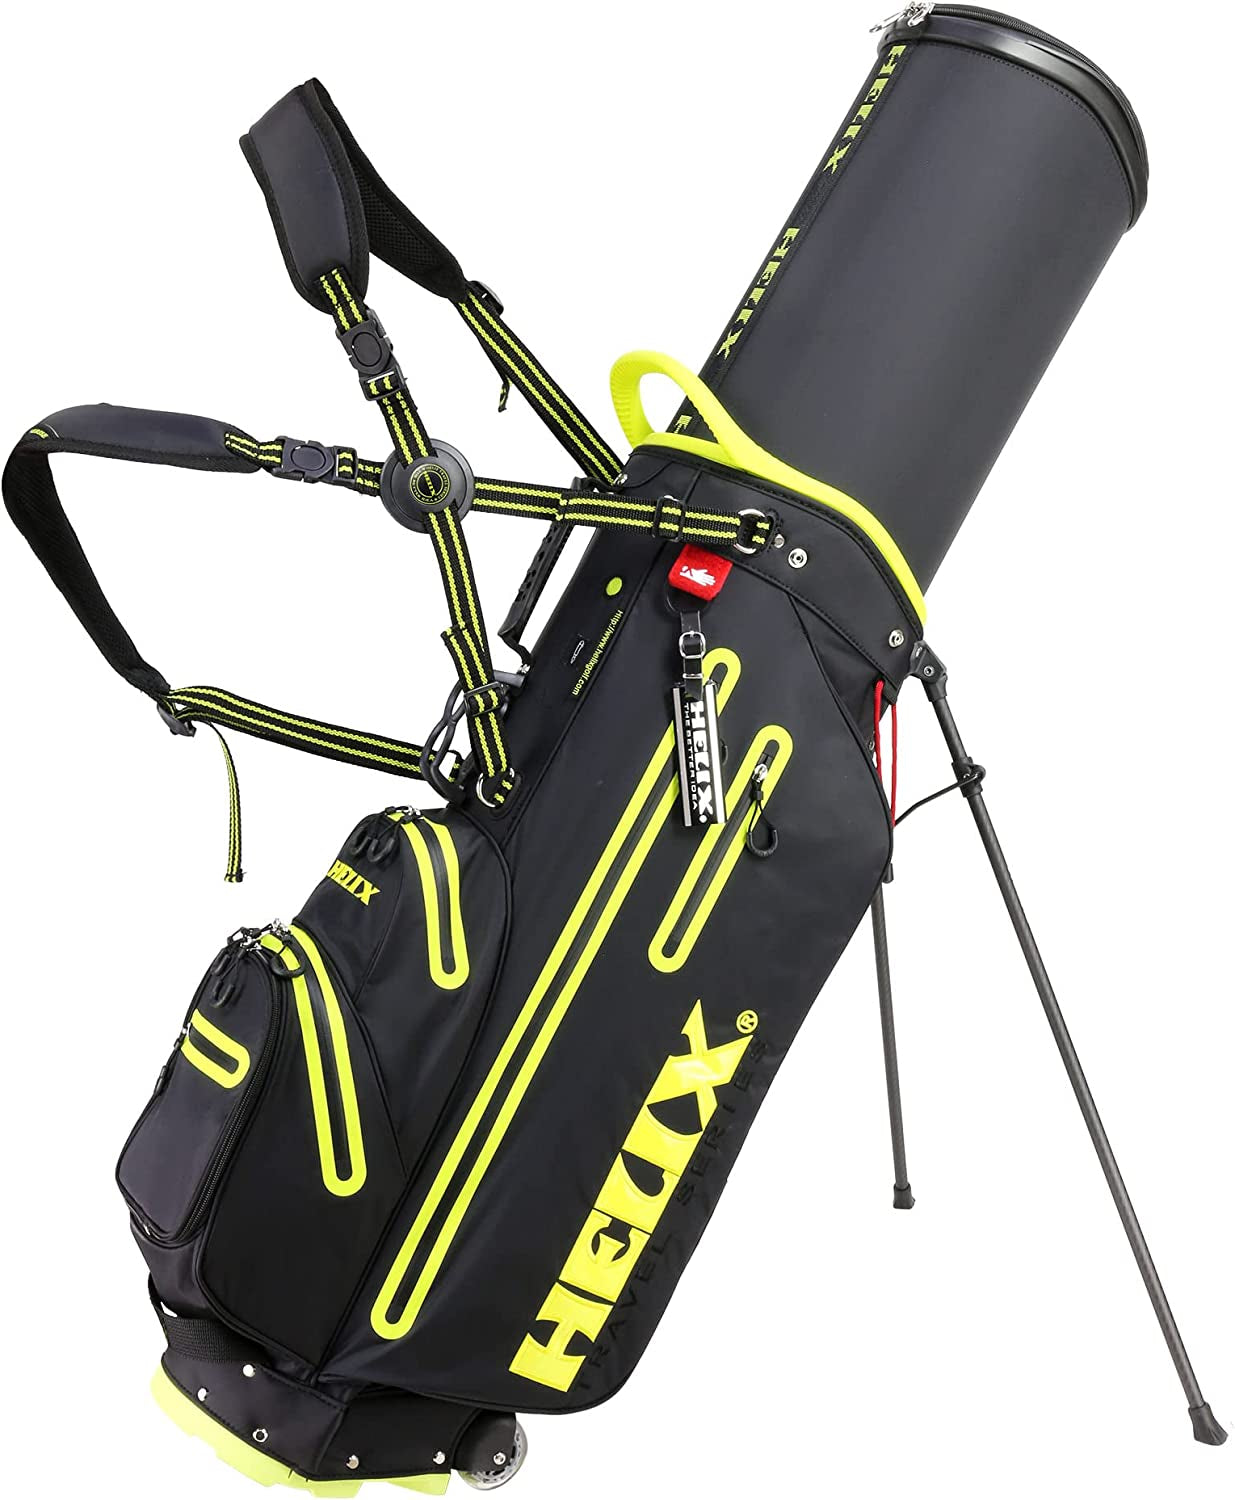 Helix Golf Stand Bag Retractable, 6 Way Dividers with Backstrap Shoulder Carry Golf Bag, Golf Bag Stand with Wheel for Traveling